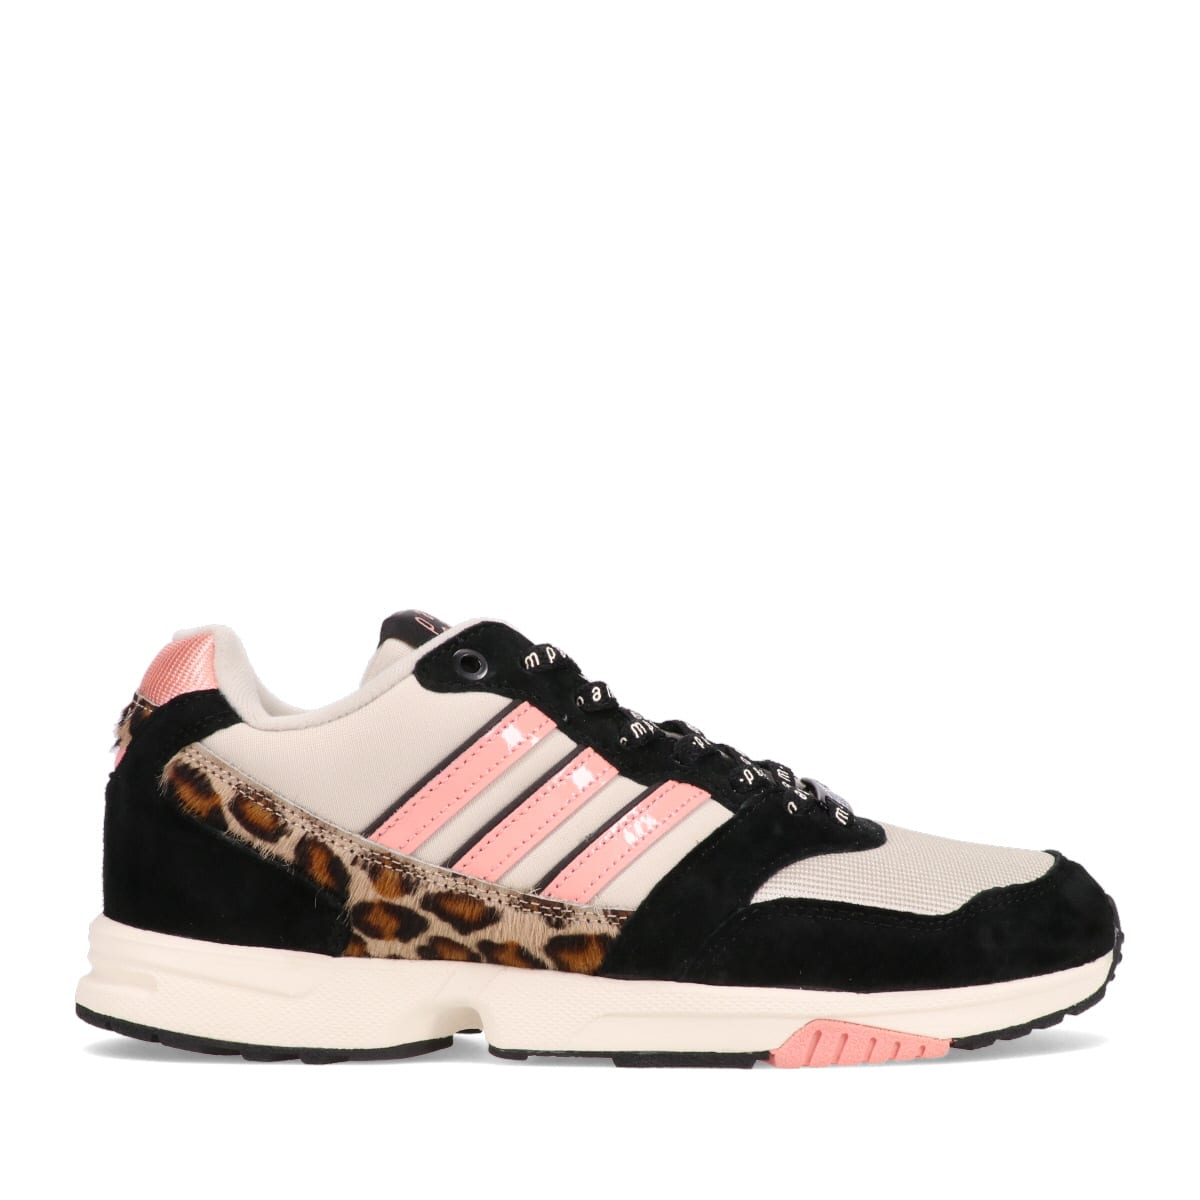 adidas ZX 1000 PAM PAM CLEAR BROWN/TRACE PINK/CORE BLACK